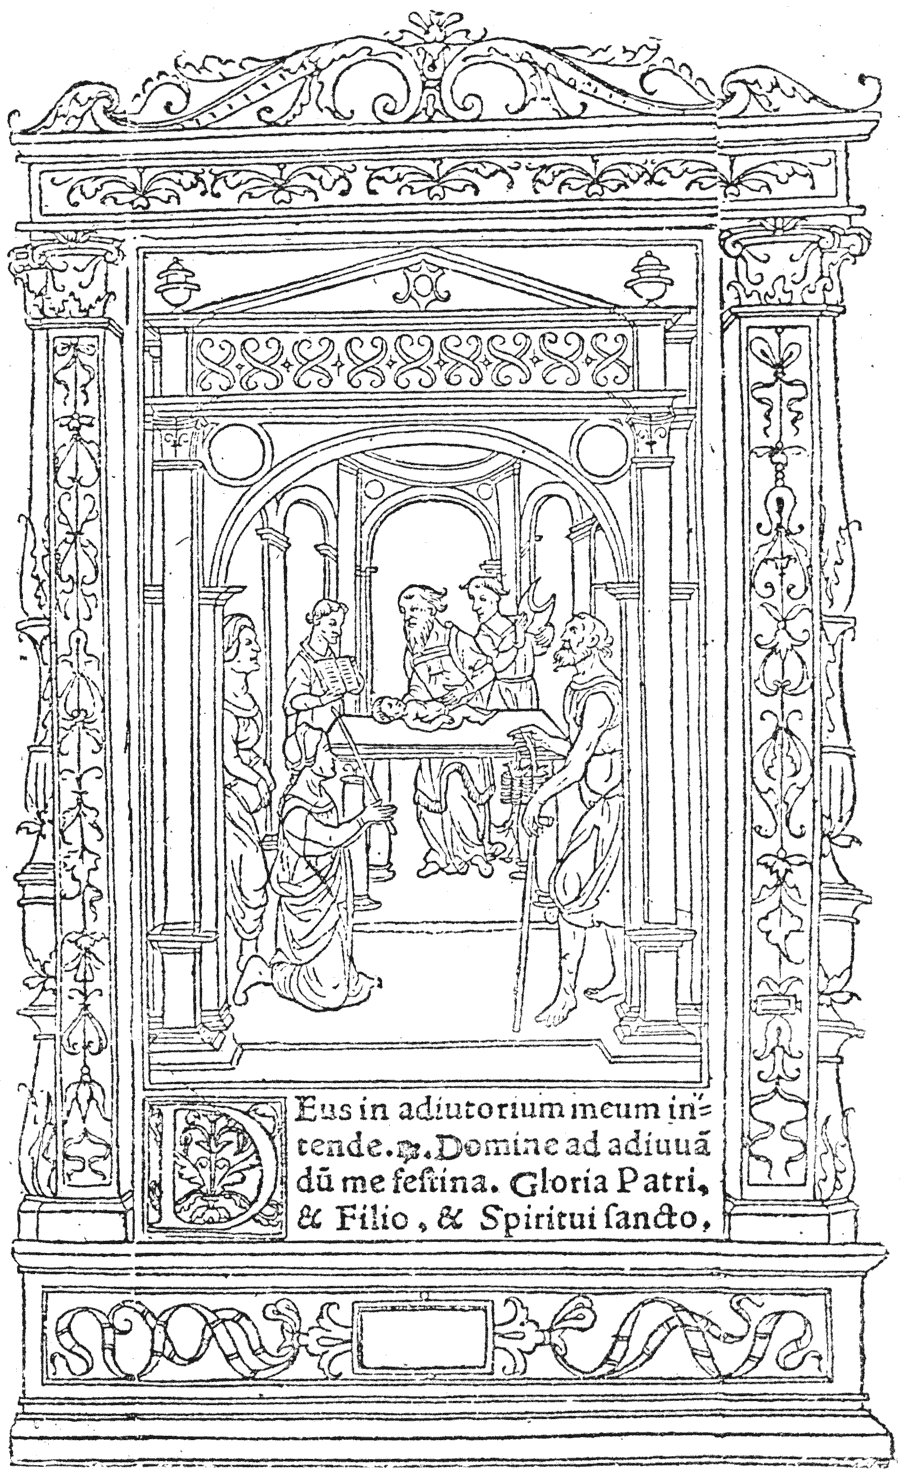 Heures de la Vierge of Geoffroy Tory, circa 1520. The Circumcision. From Henri Bouchot 'The Printed Book' (1887), page 114, published size in Bouchot, 6.9cm wide by 11.5cm high.